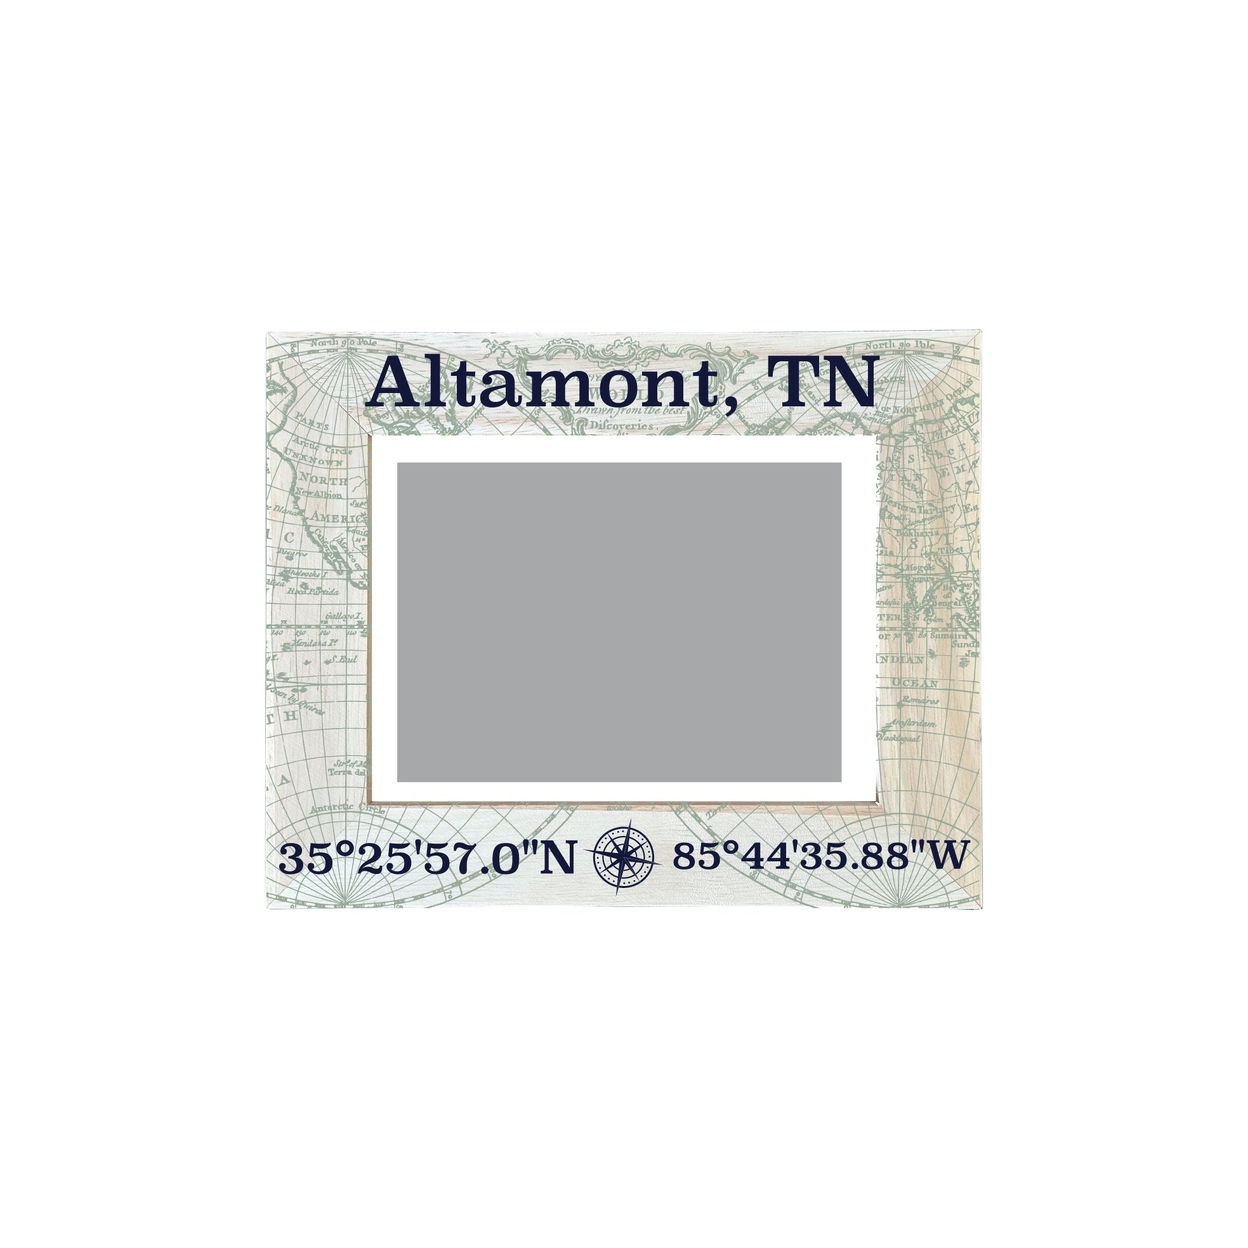 Altamont Tennessee Souvenir Wooden Photo Frame Compass Coordinates Design Matted To 4 X 6